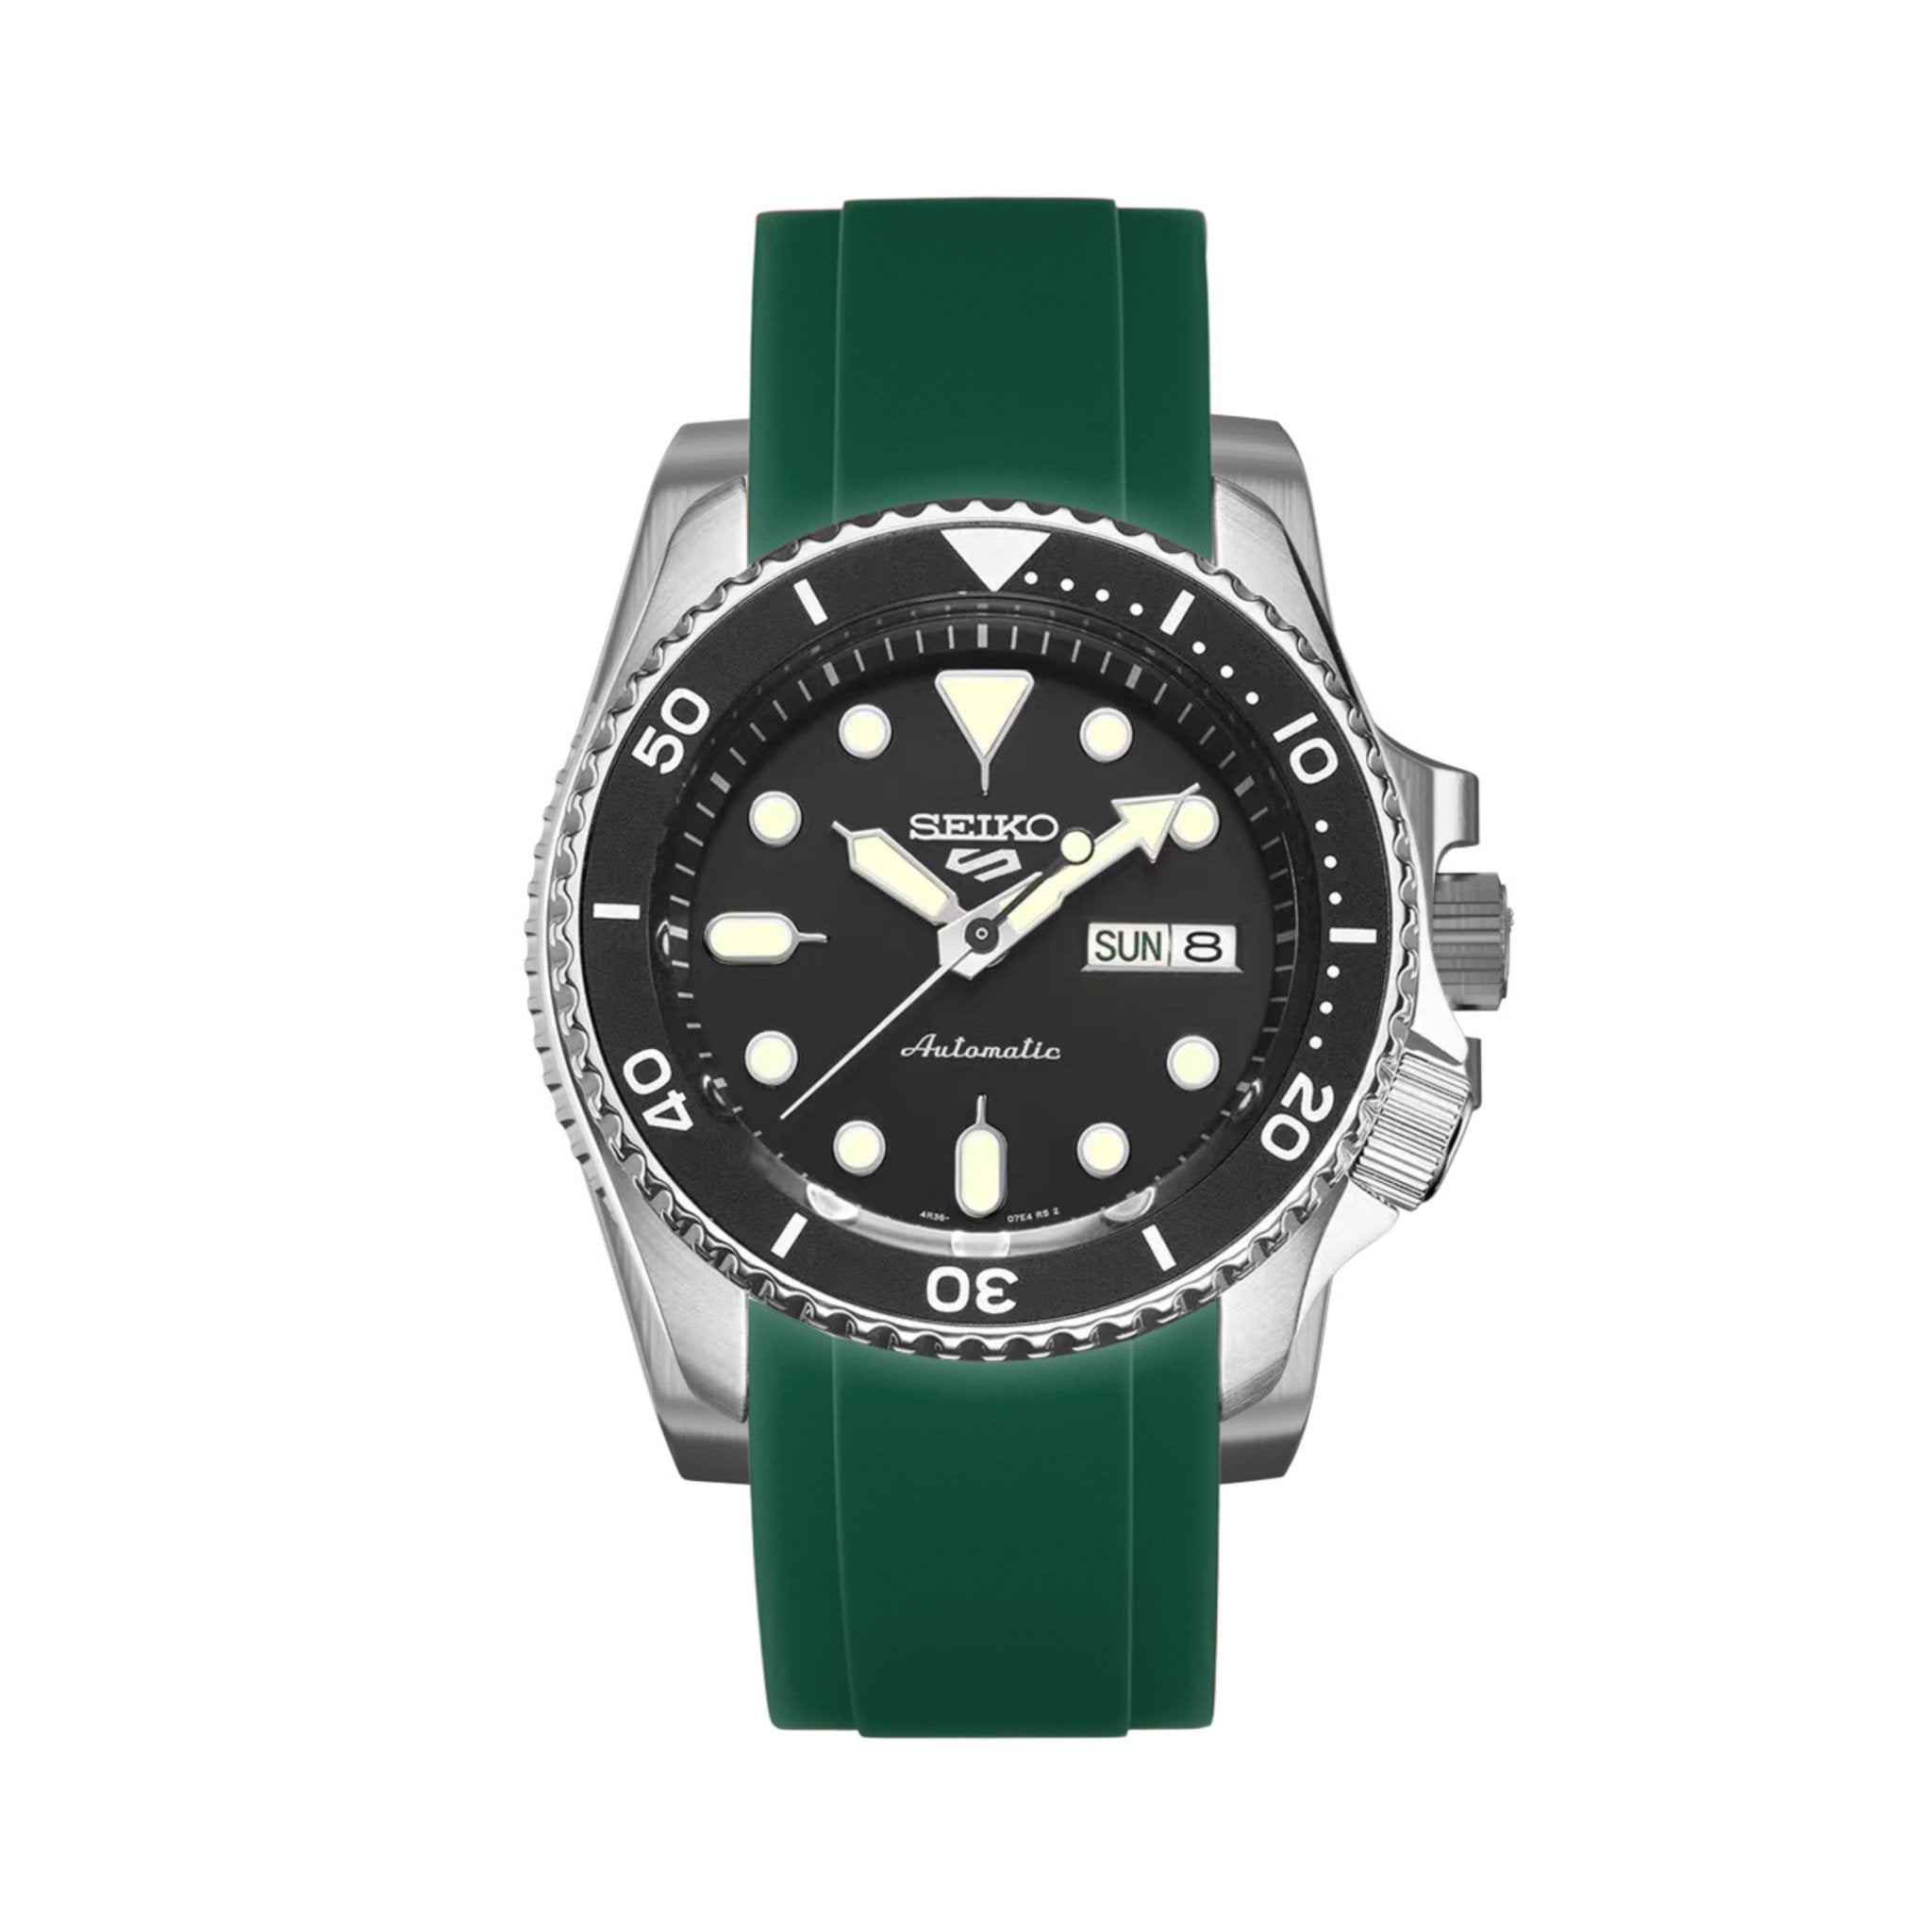 Curved End Soft Silicone Strap - Compatible with Seiko 5 Sports - Dark Green (2418) -StrapSeeker